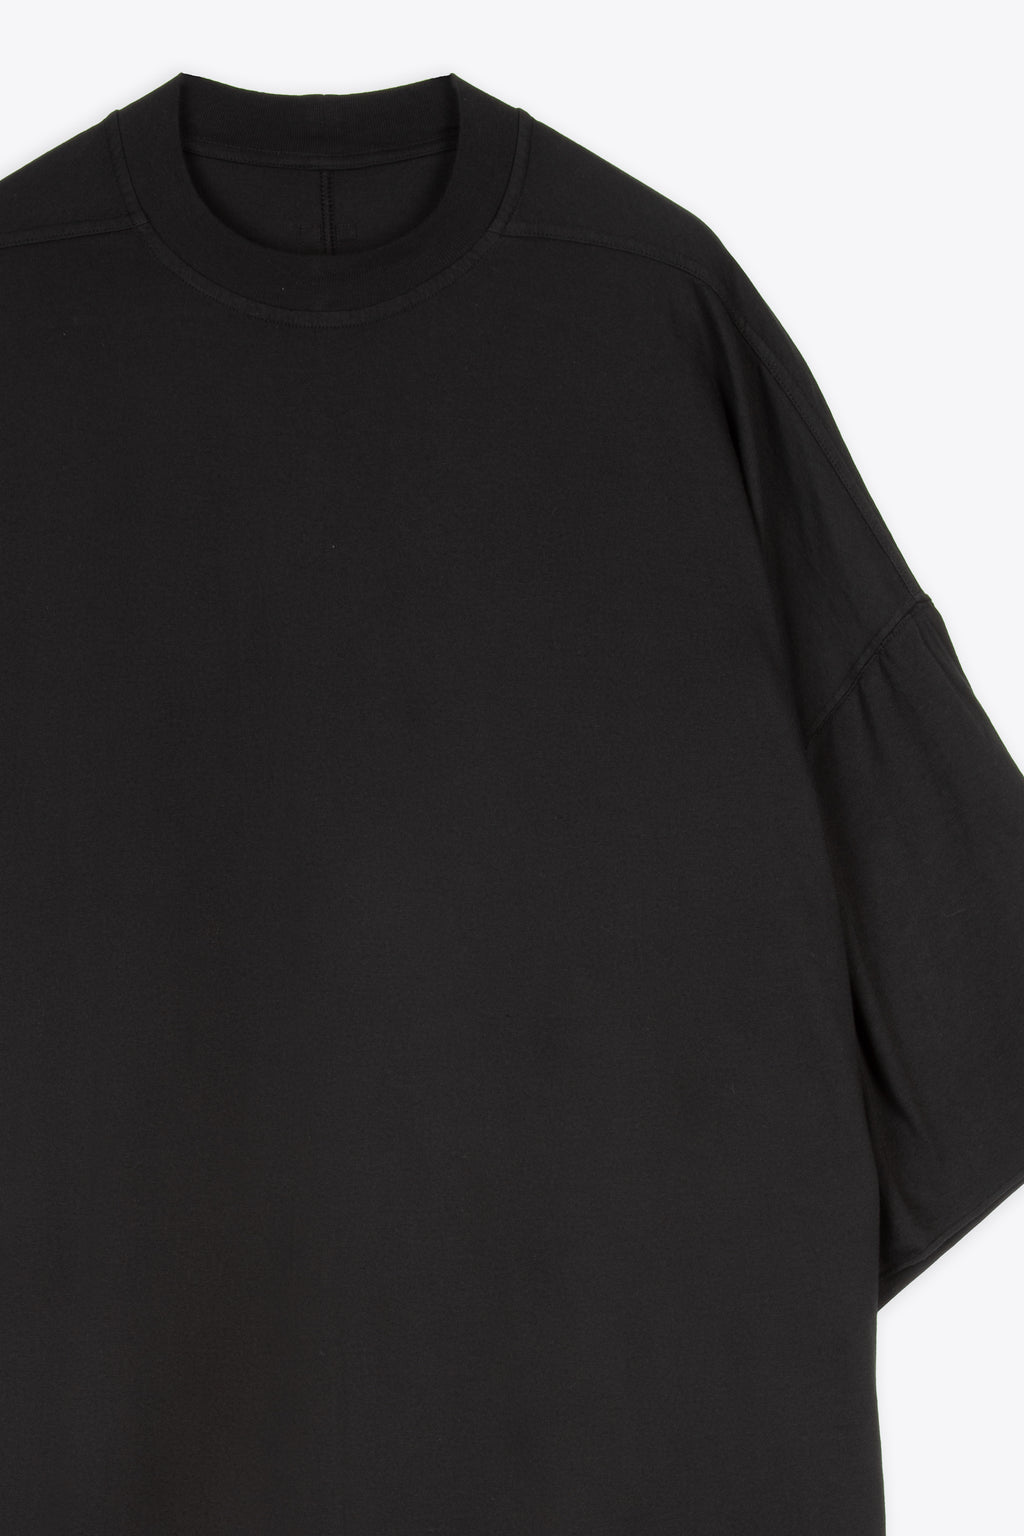 alt-image__Black-cotton-oversized-t-shirt-with-raw-cut-hems---Tommy-T